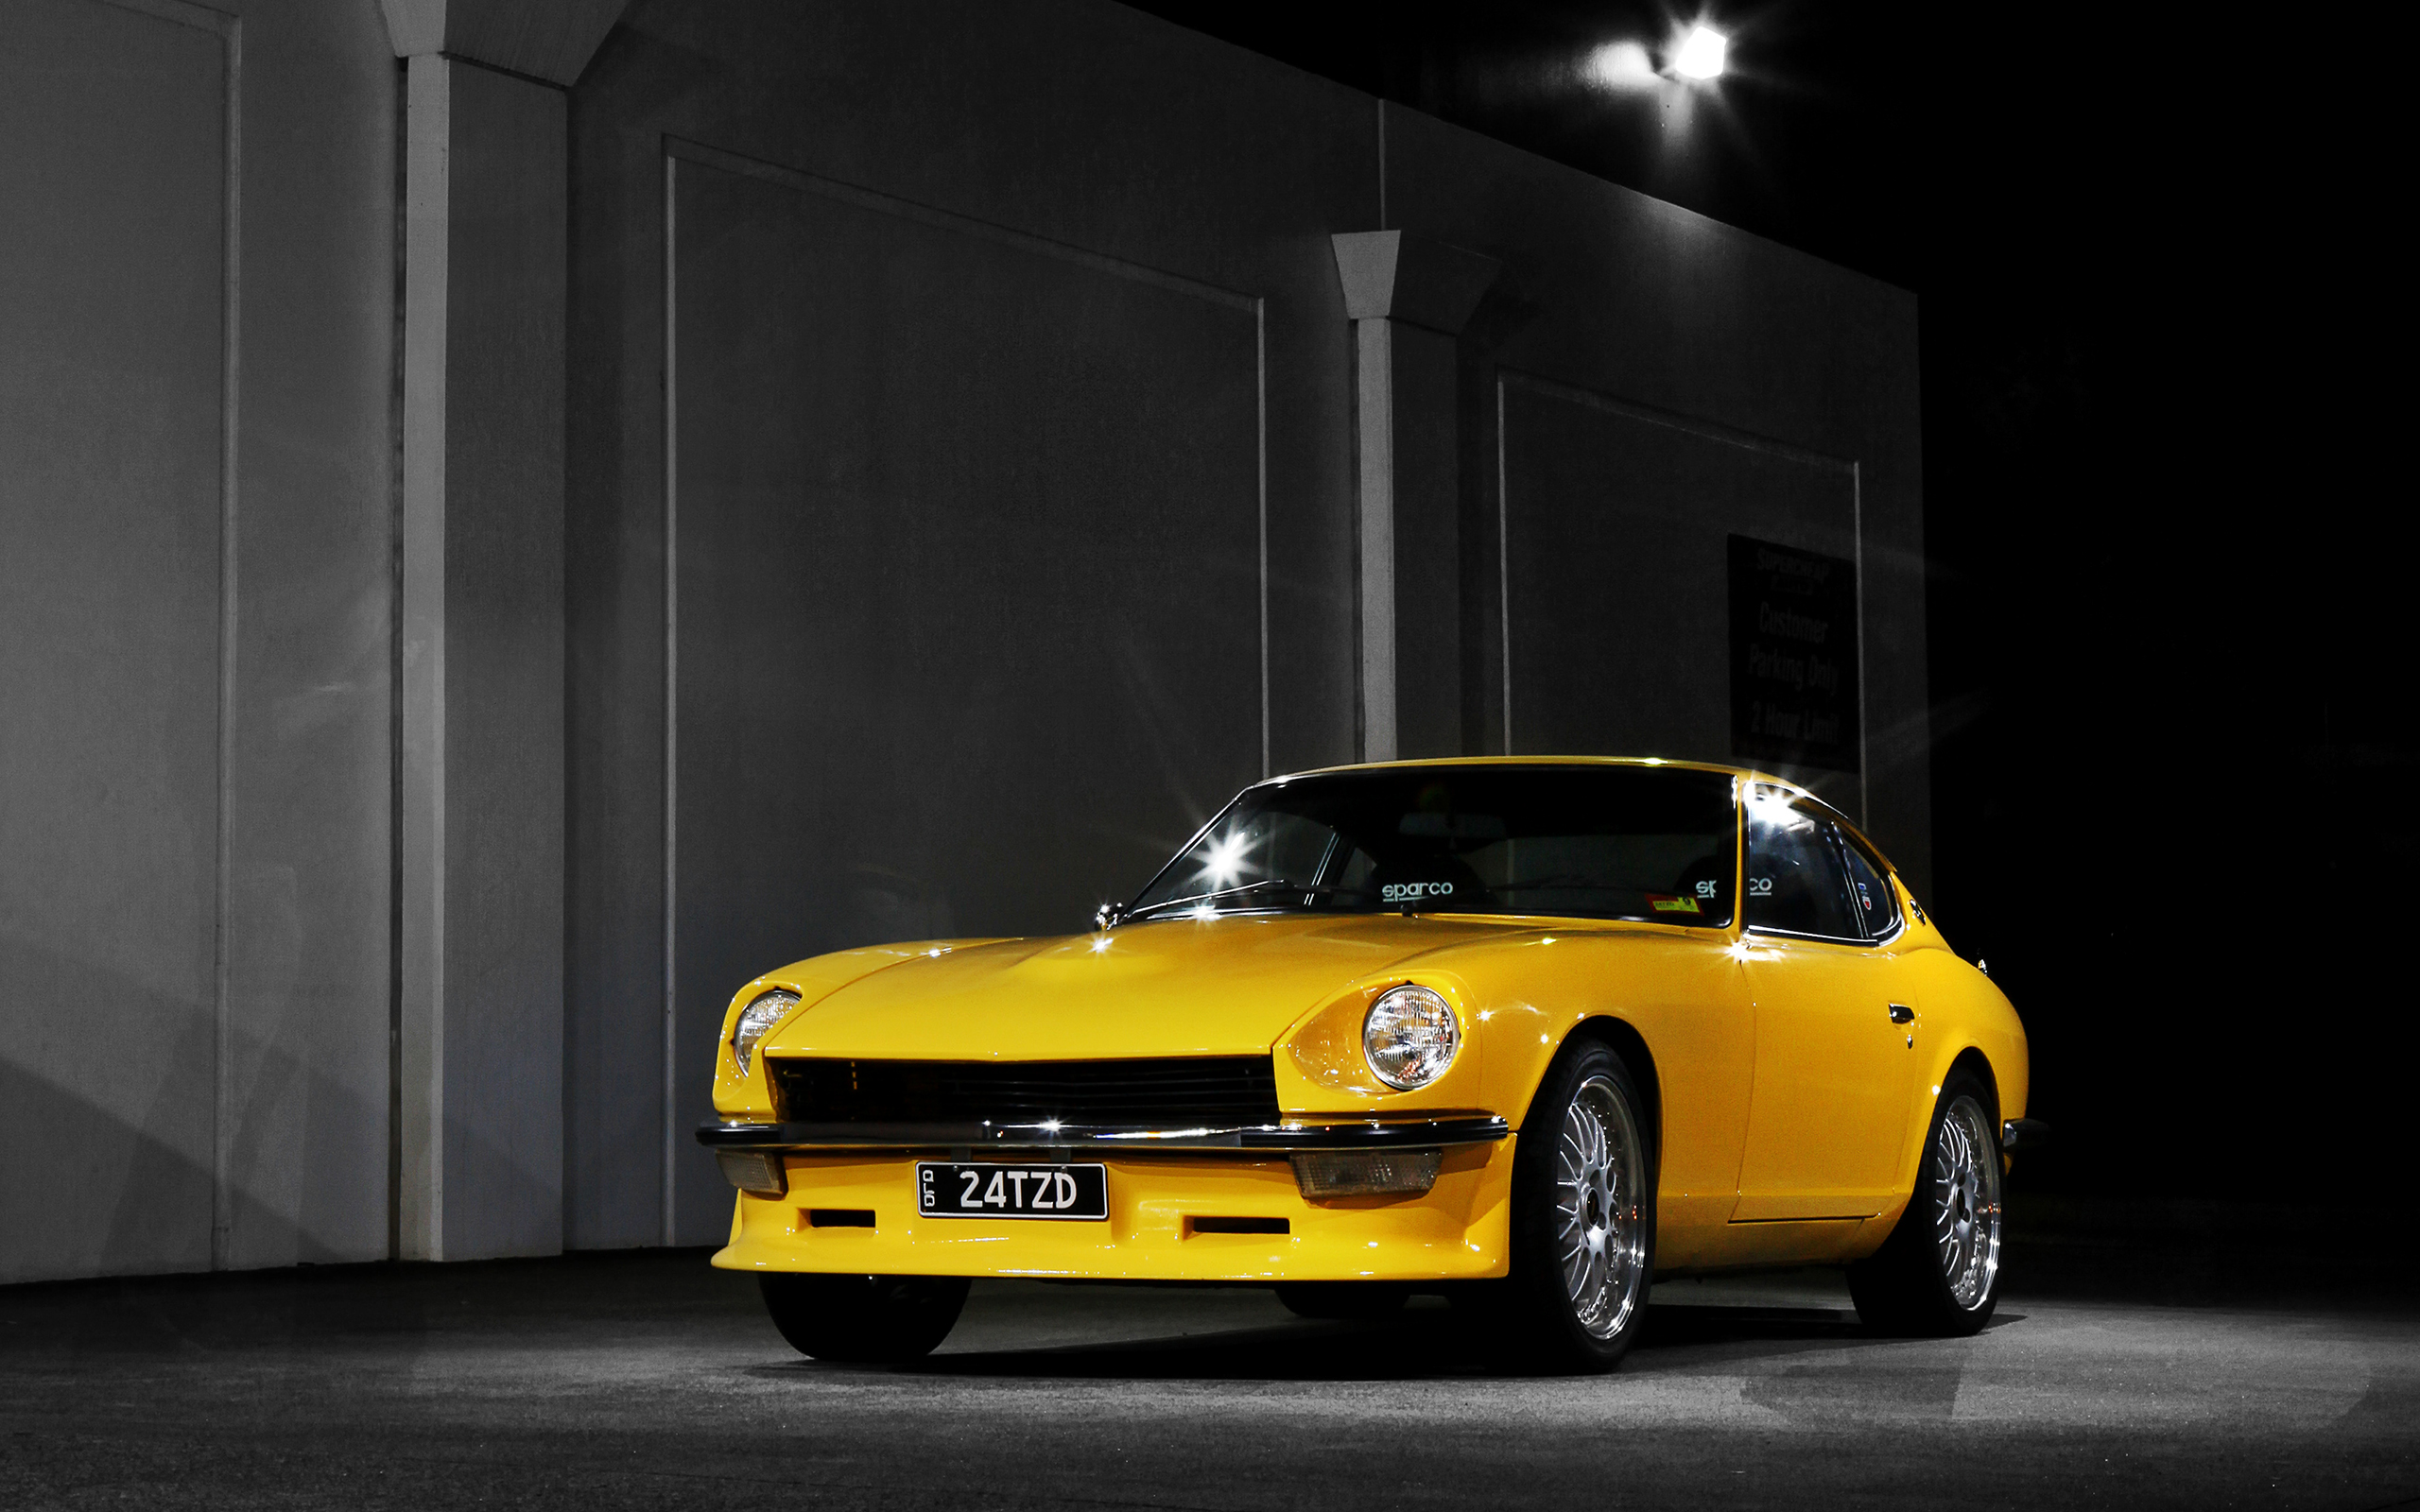 General 2560x1600 car vehicle night tuning Japanese cars Nissan S30 Nissan yellow cars